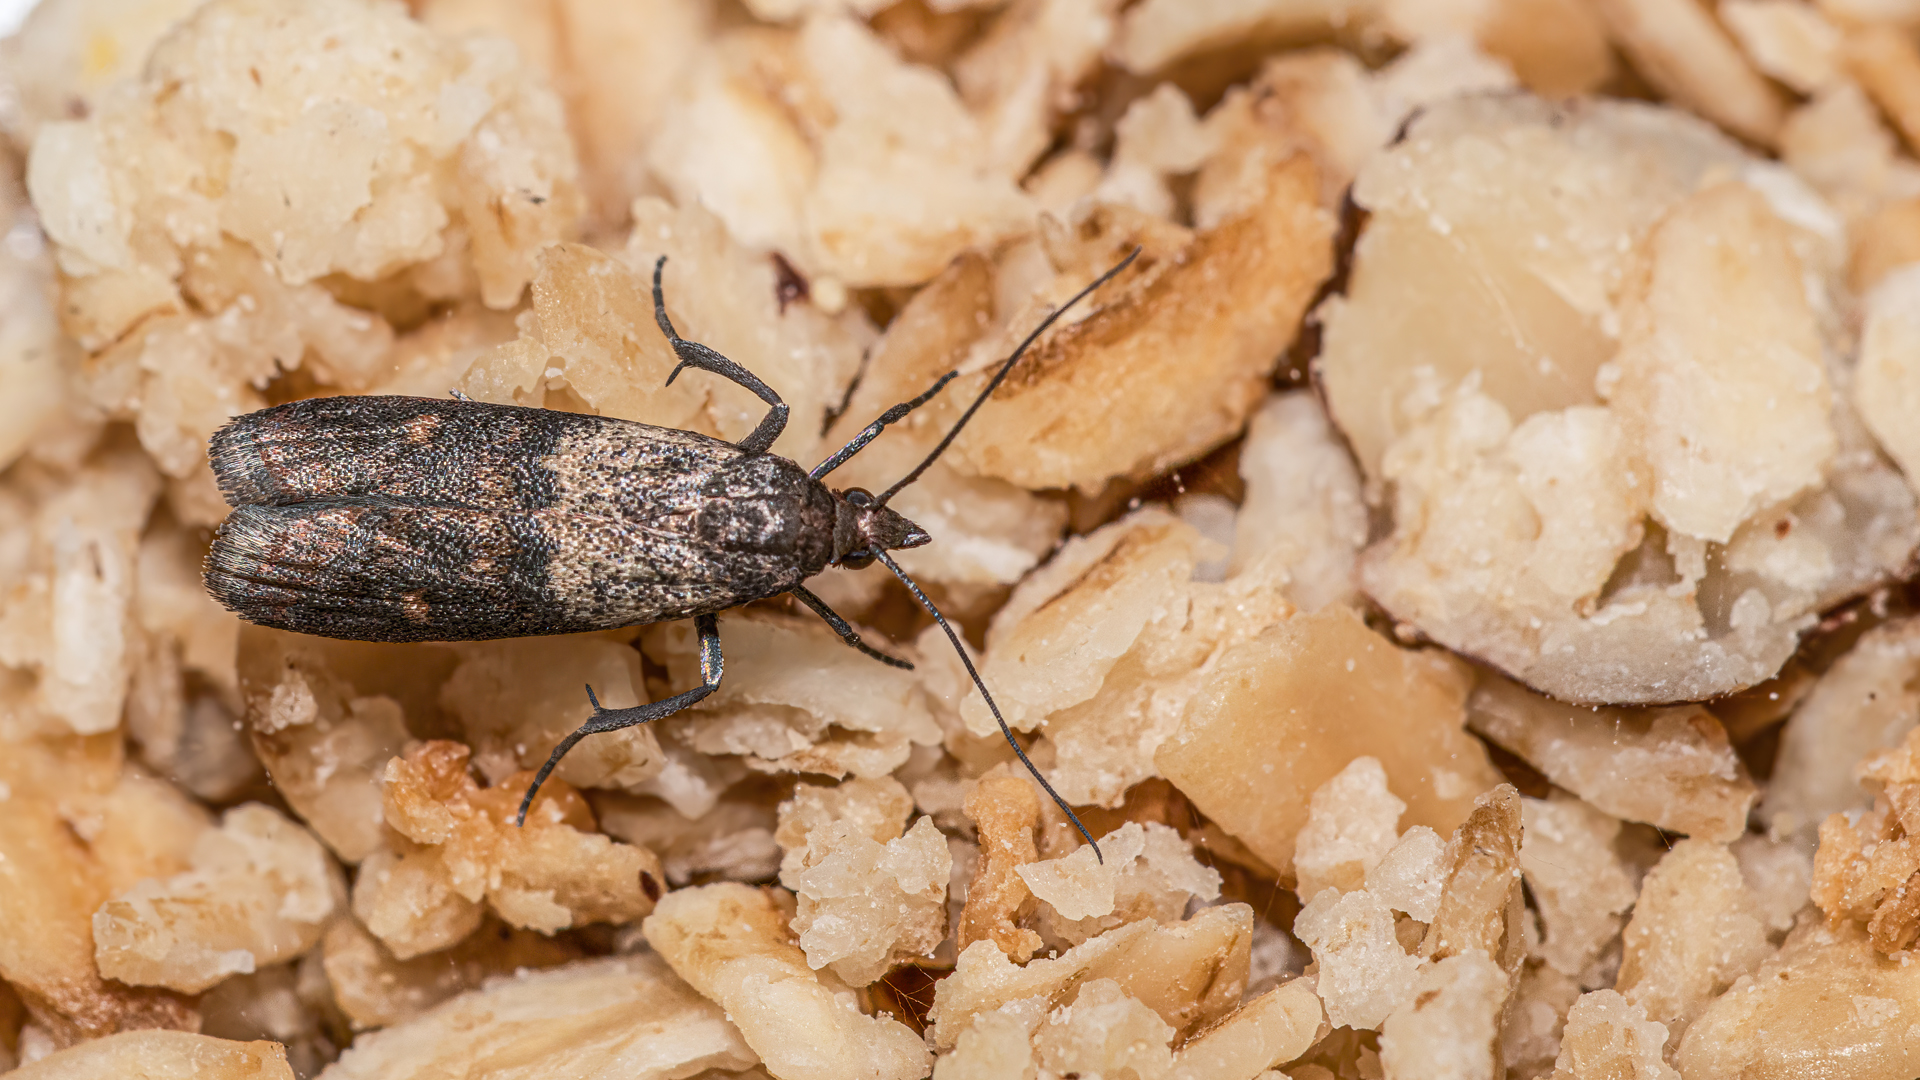 Sawtoothed grain beetle on top of loose grains